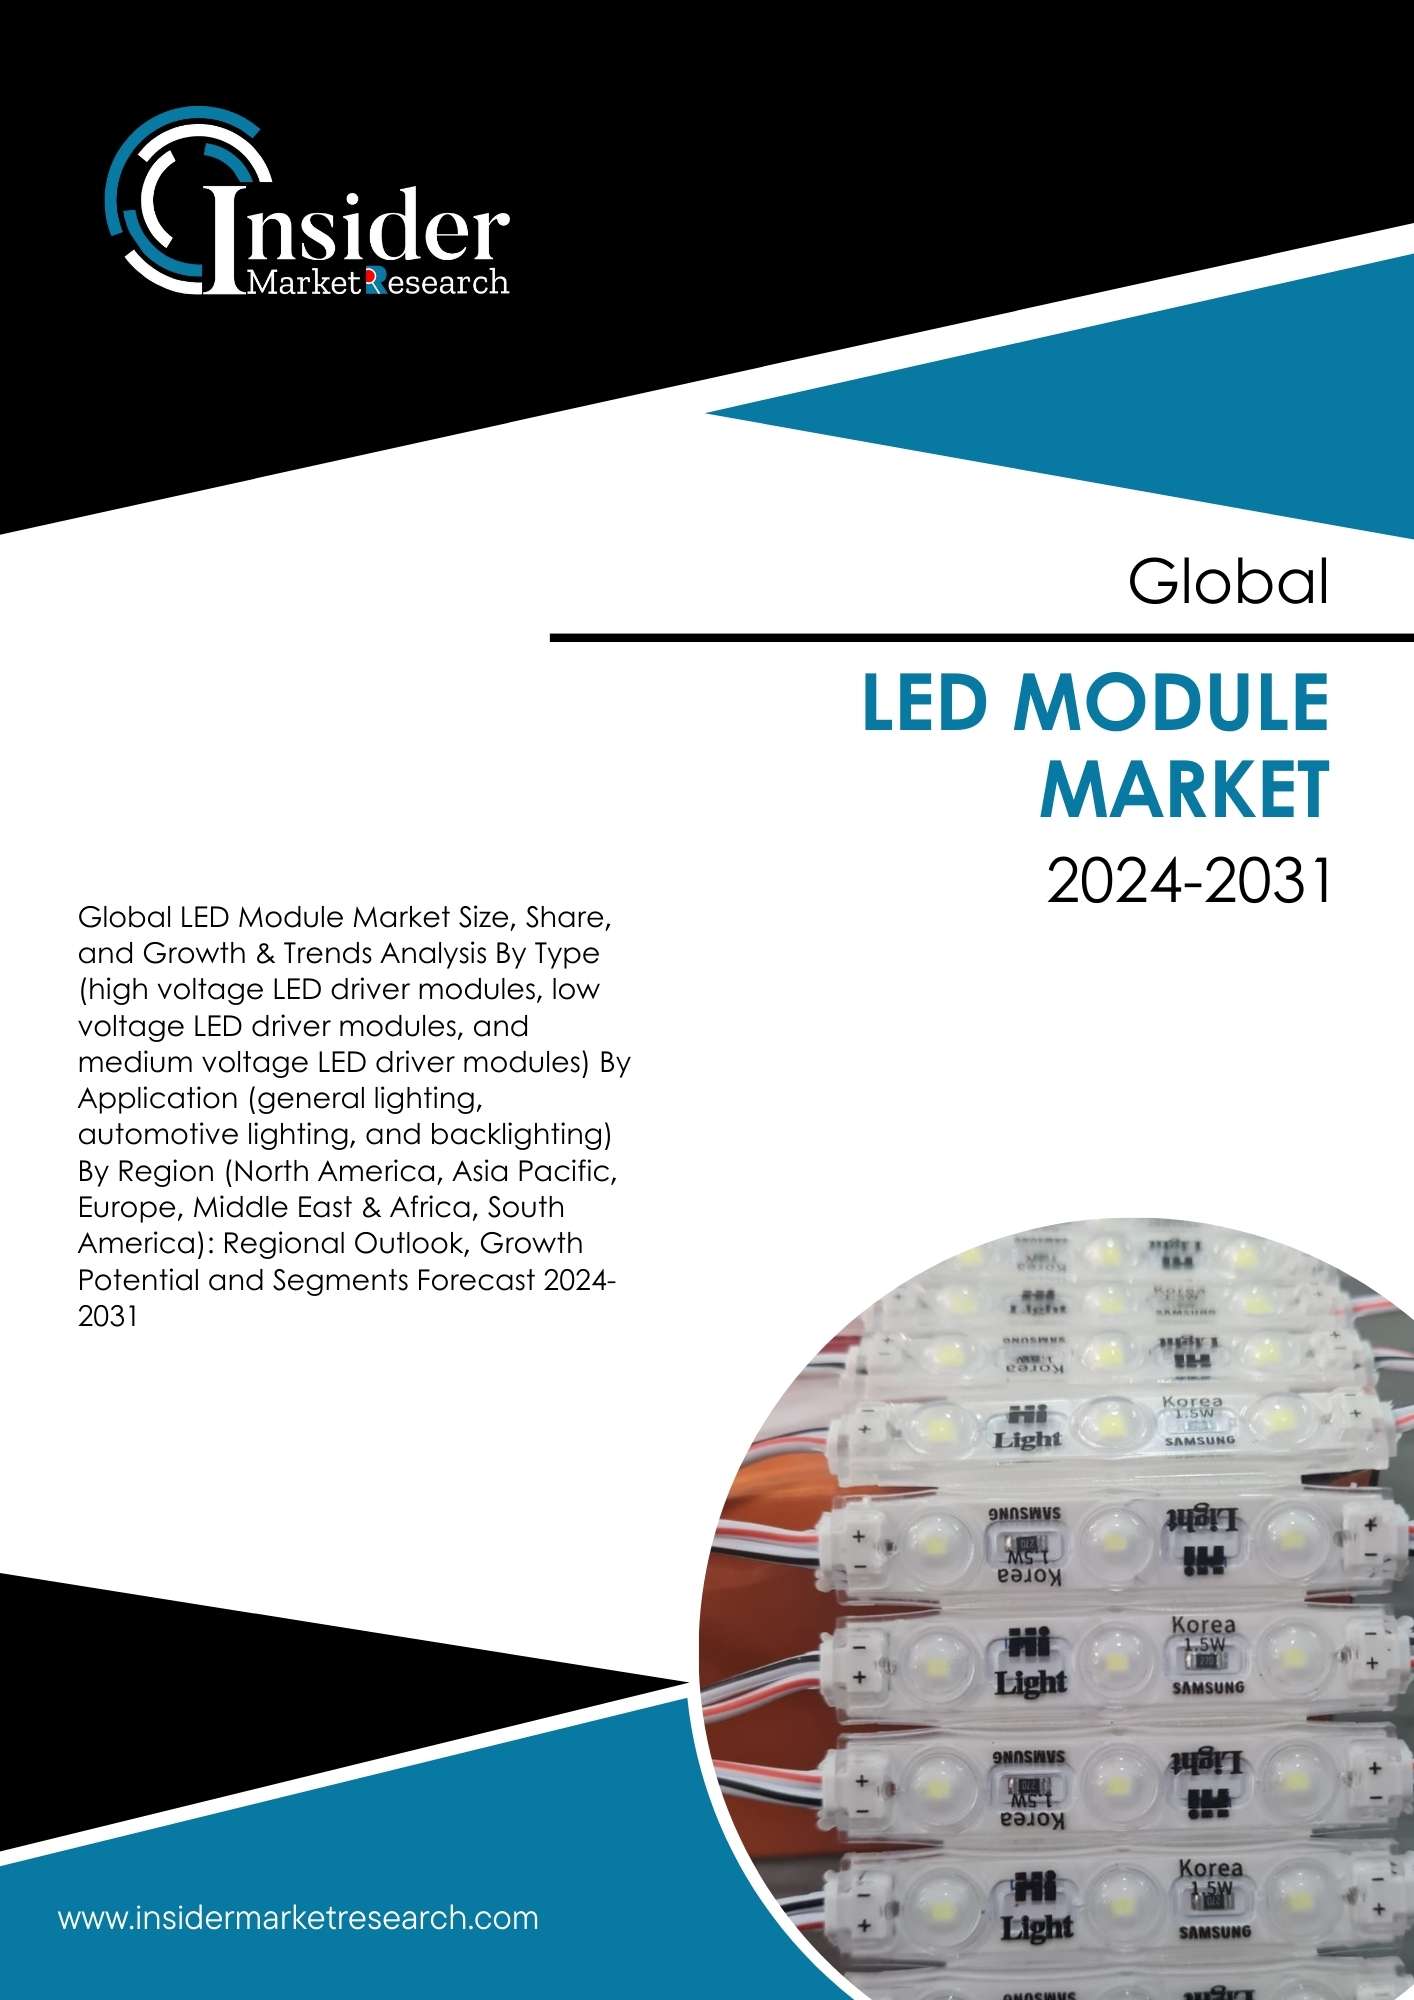 LED Module Market Global Size, Demand & Forecast By 2031 | Insider Market Research